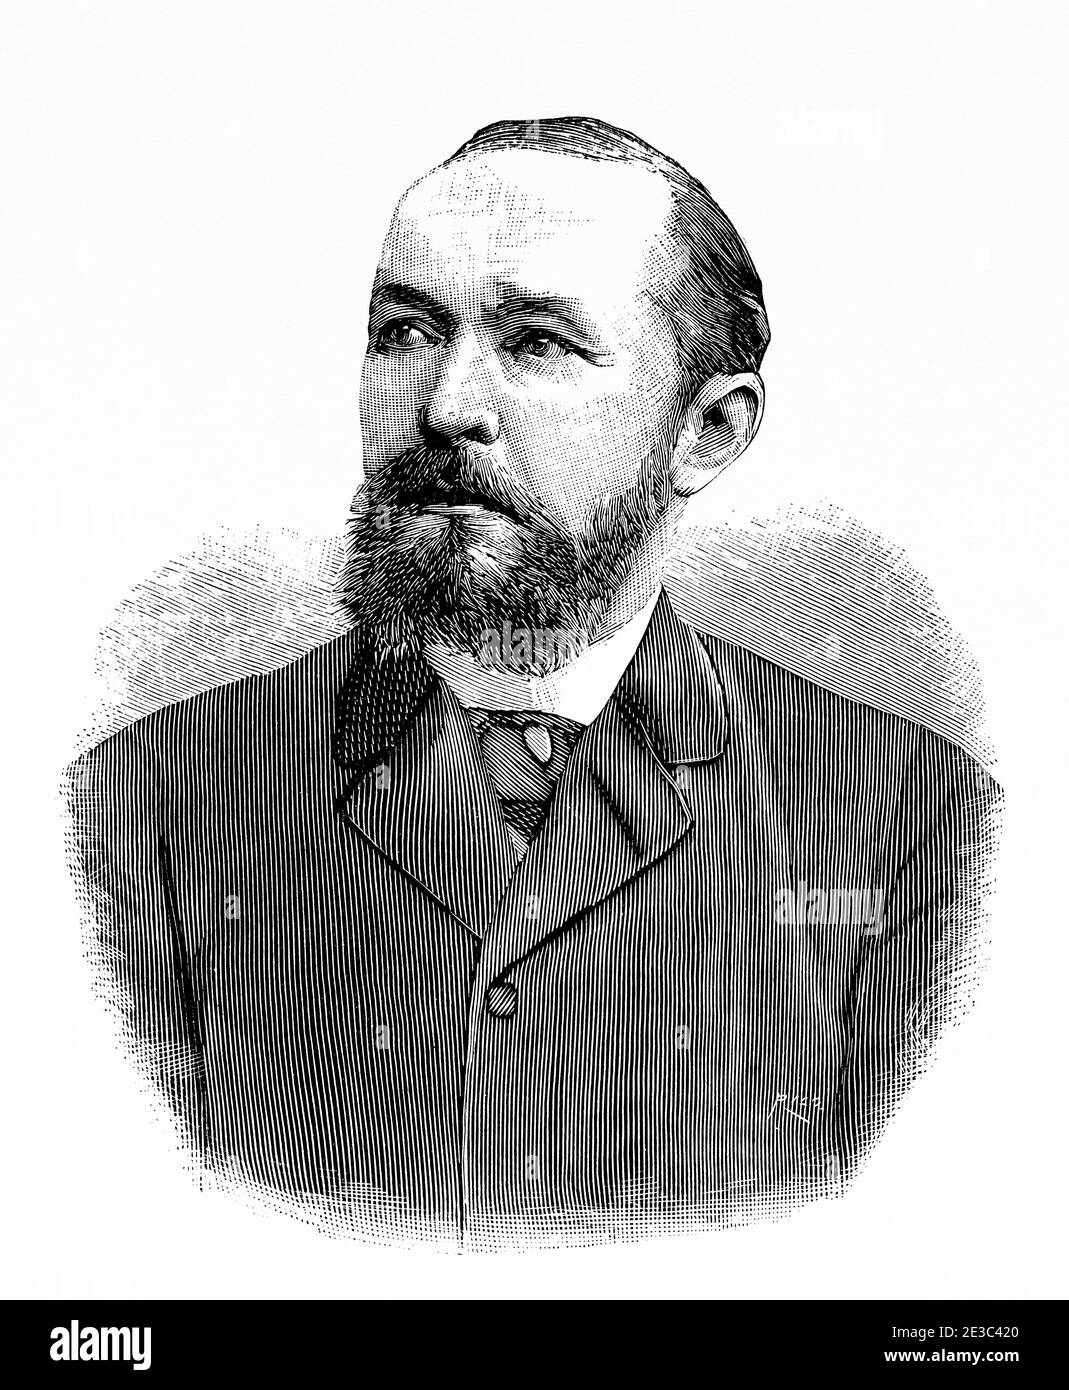 Portrait of Emil von Behring (1854 - 1917) German physiologist who received the 1901 Nobel Prize in Medicine for his discovery of a diphtheria antitoxin. Germany. Old XIX century engraved illustration from La Ilustracion Española y Americana 1894 Stock Photo